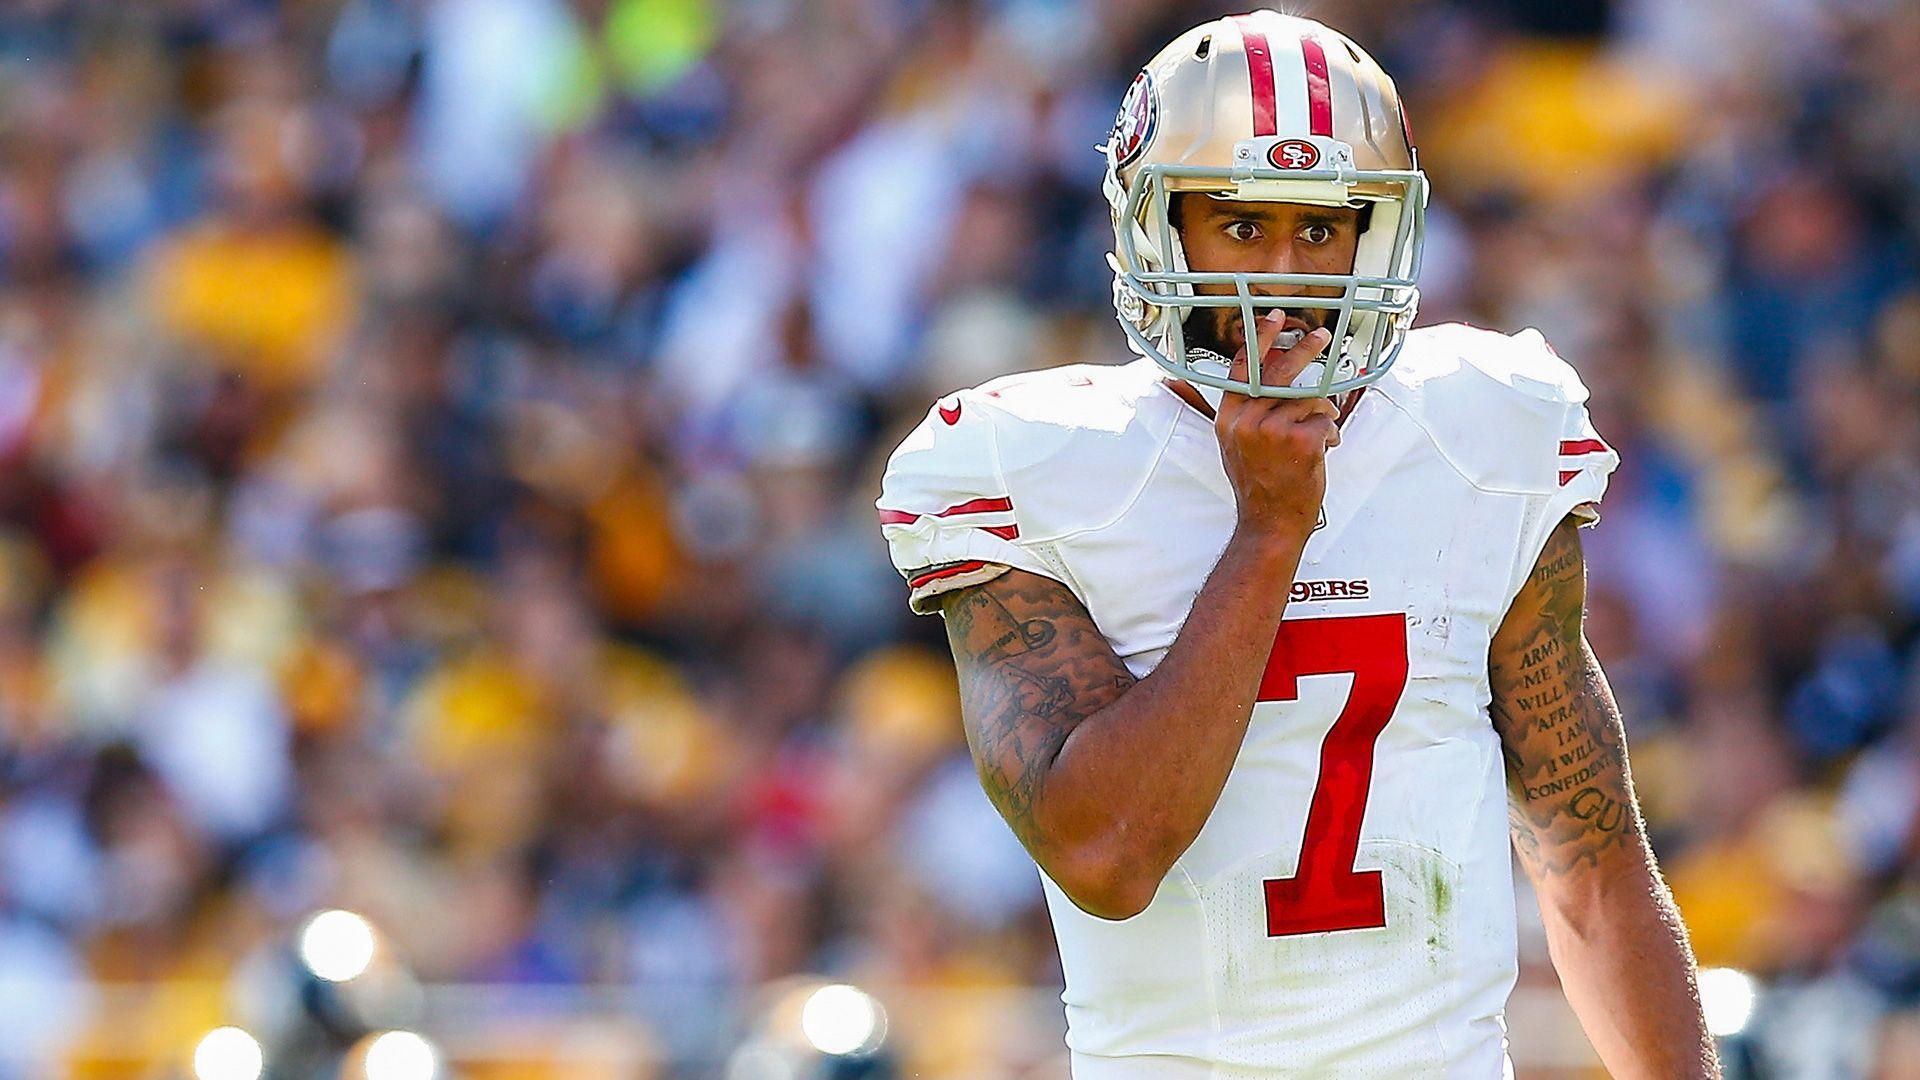 Colin Kaepernick mixed up in another toxic 49ers divorce. NFL